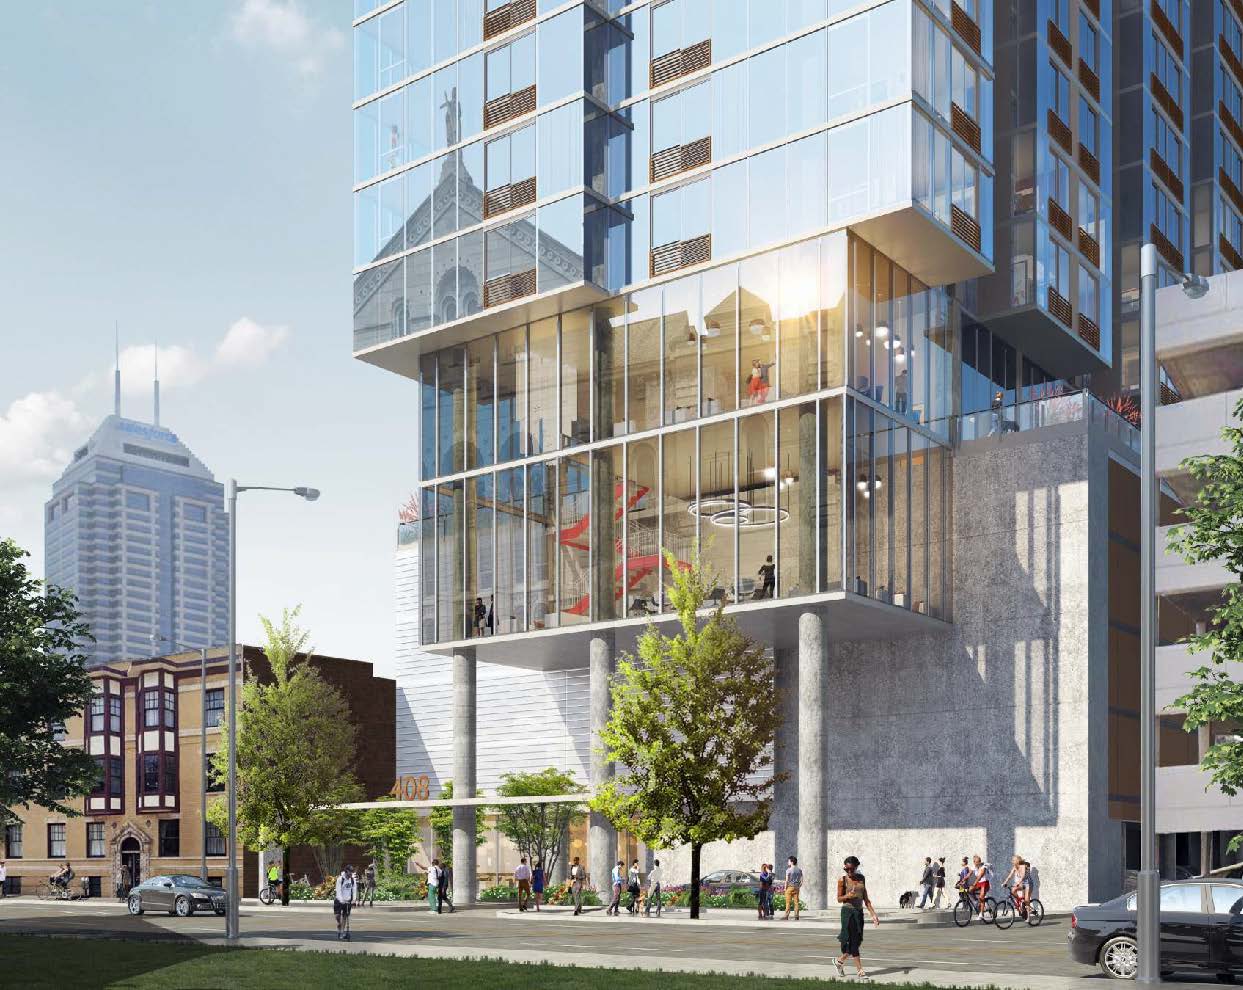 23story apartment tower proposed for downtown Indianapolis